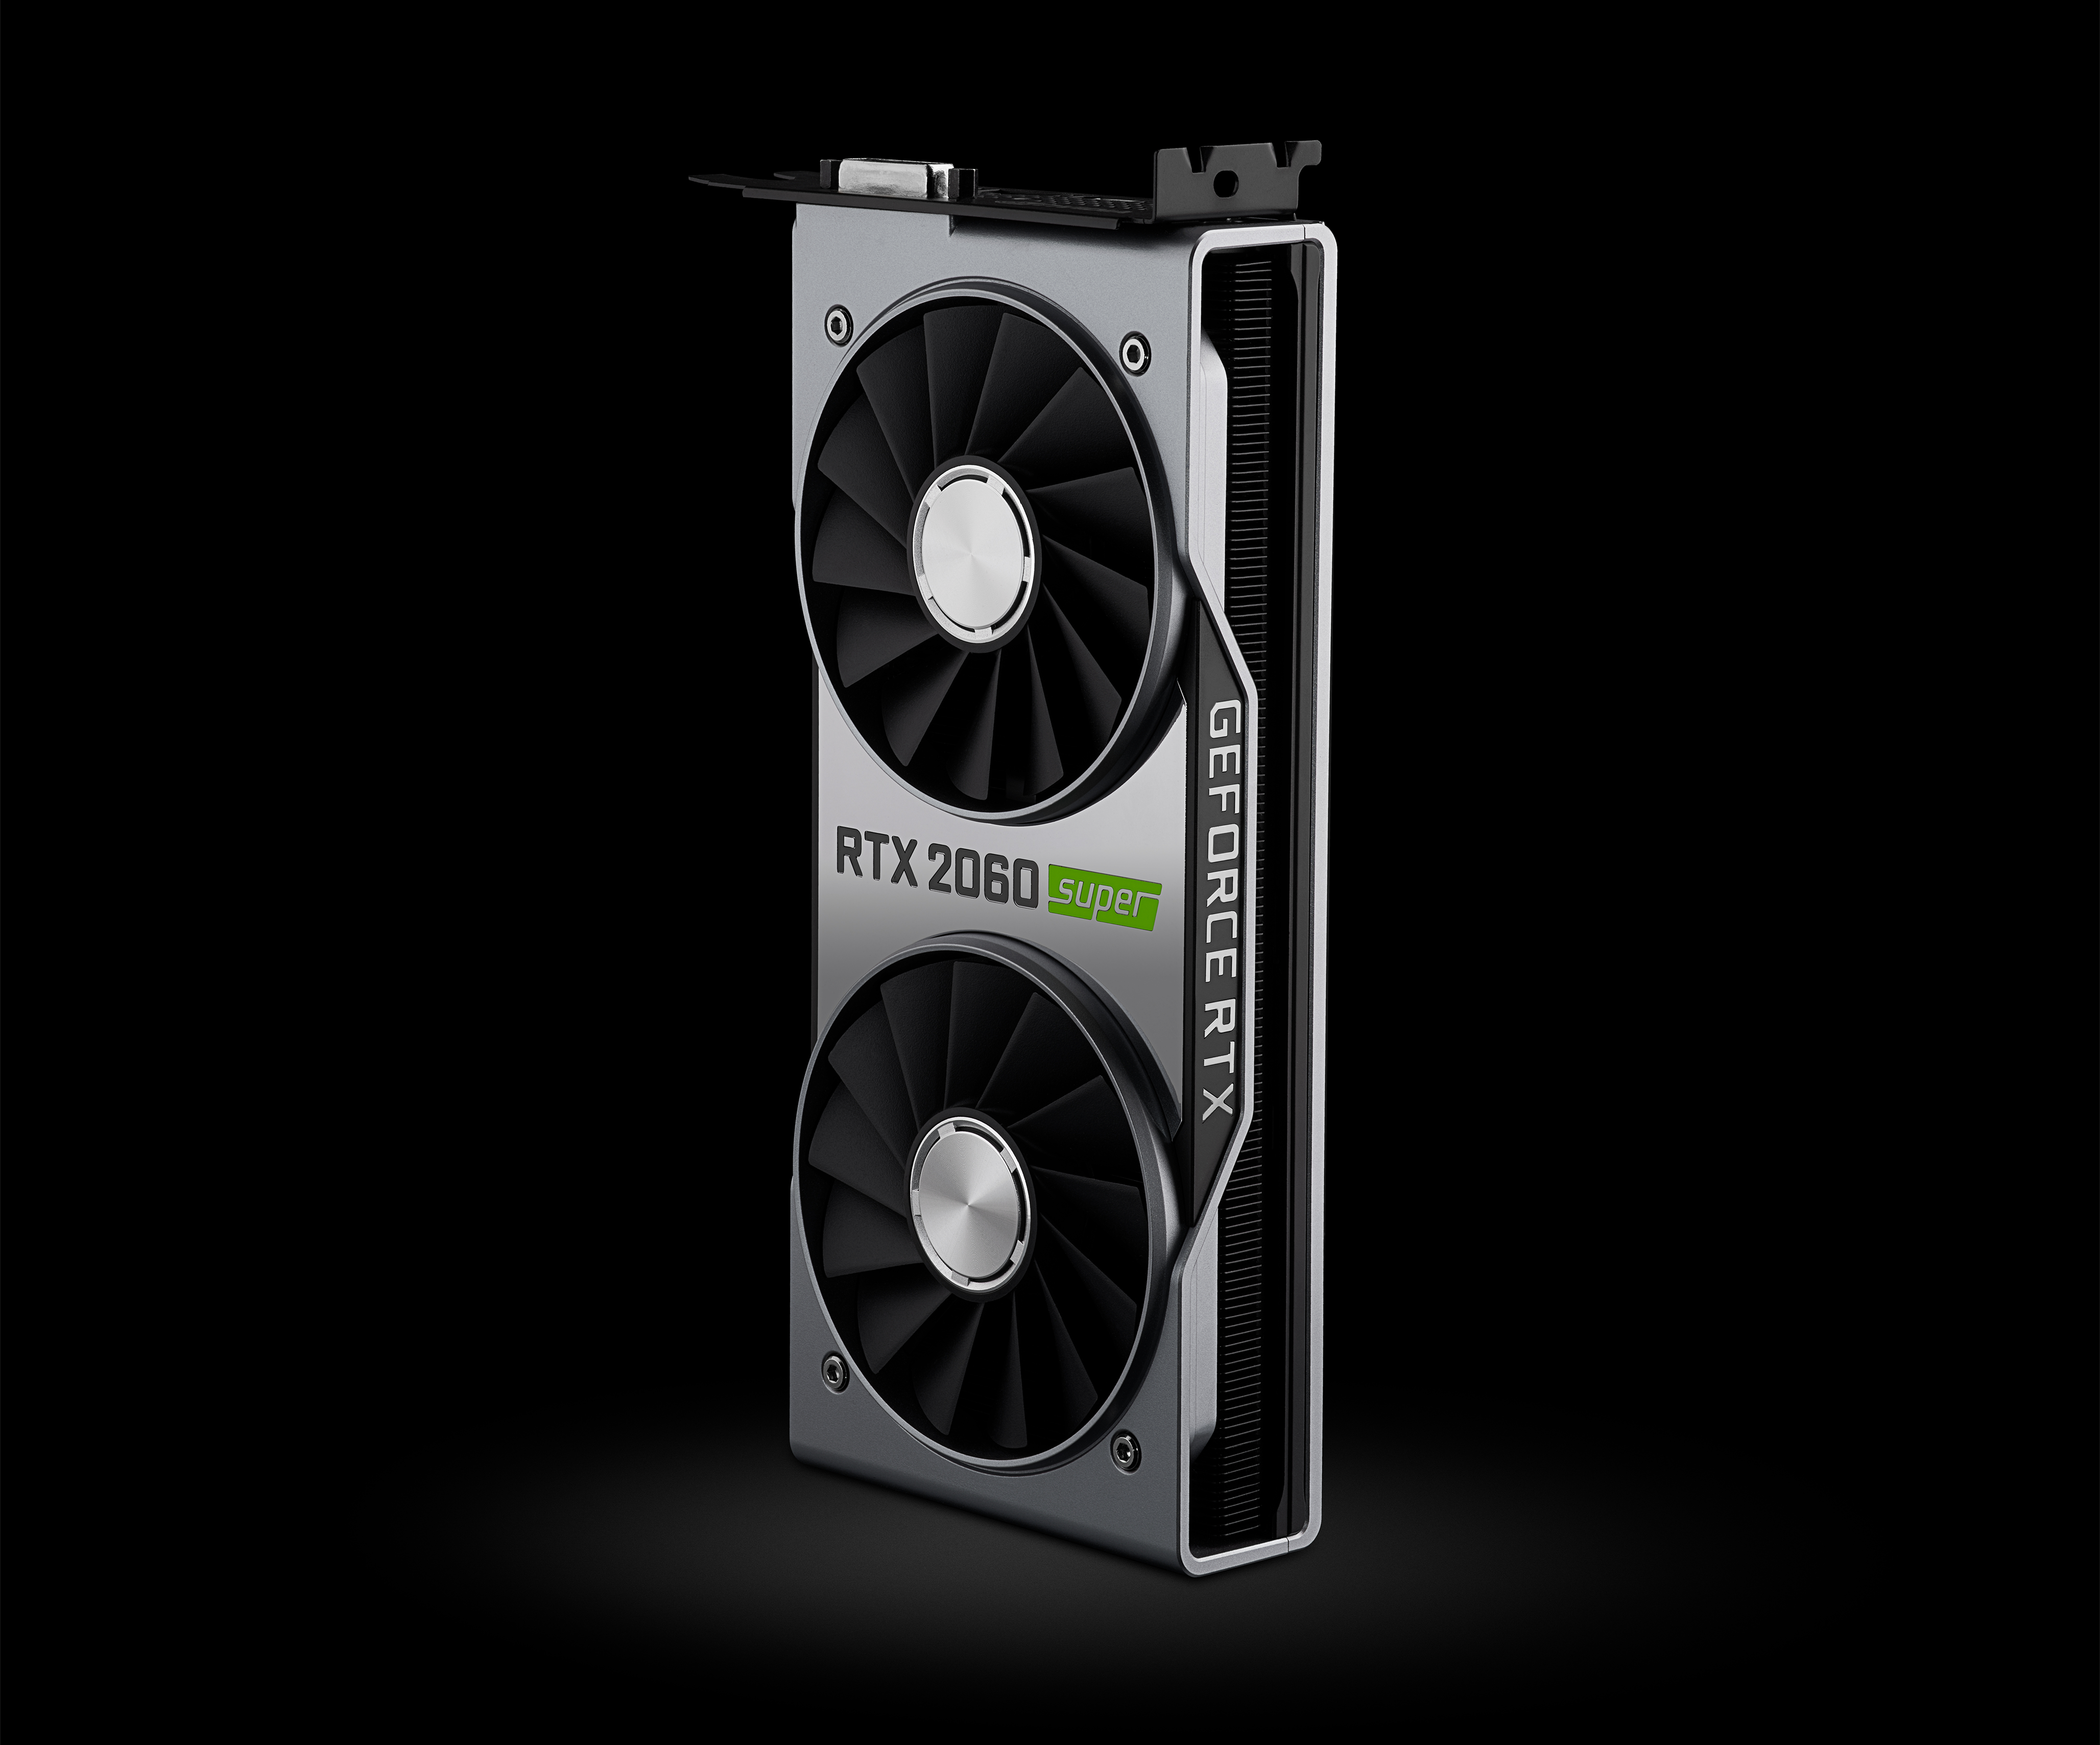 geforce-rtx-2060-super-gallery-full-size-d@2x.png